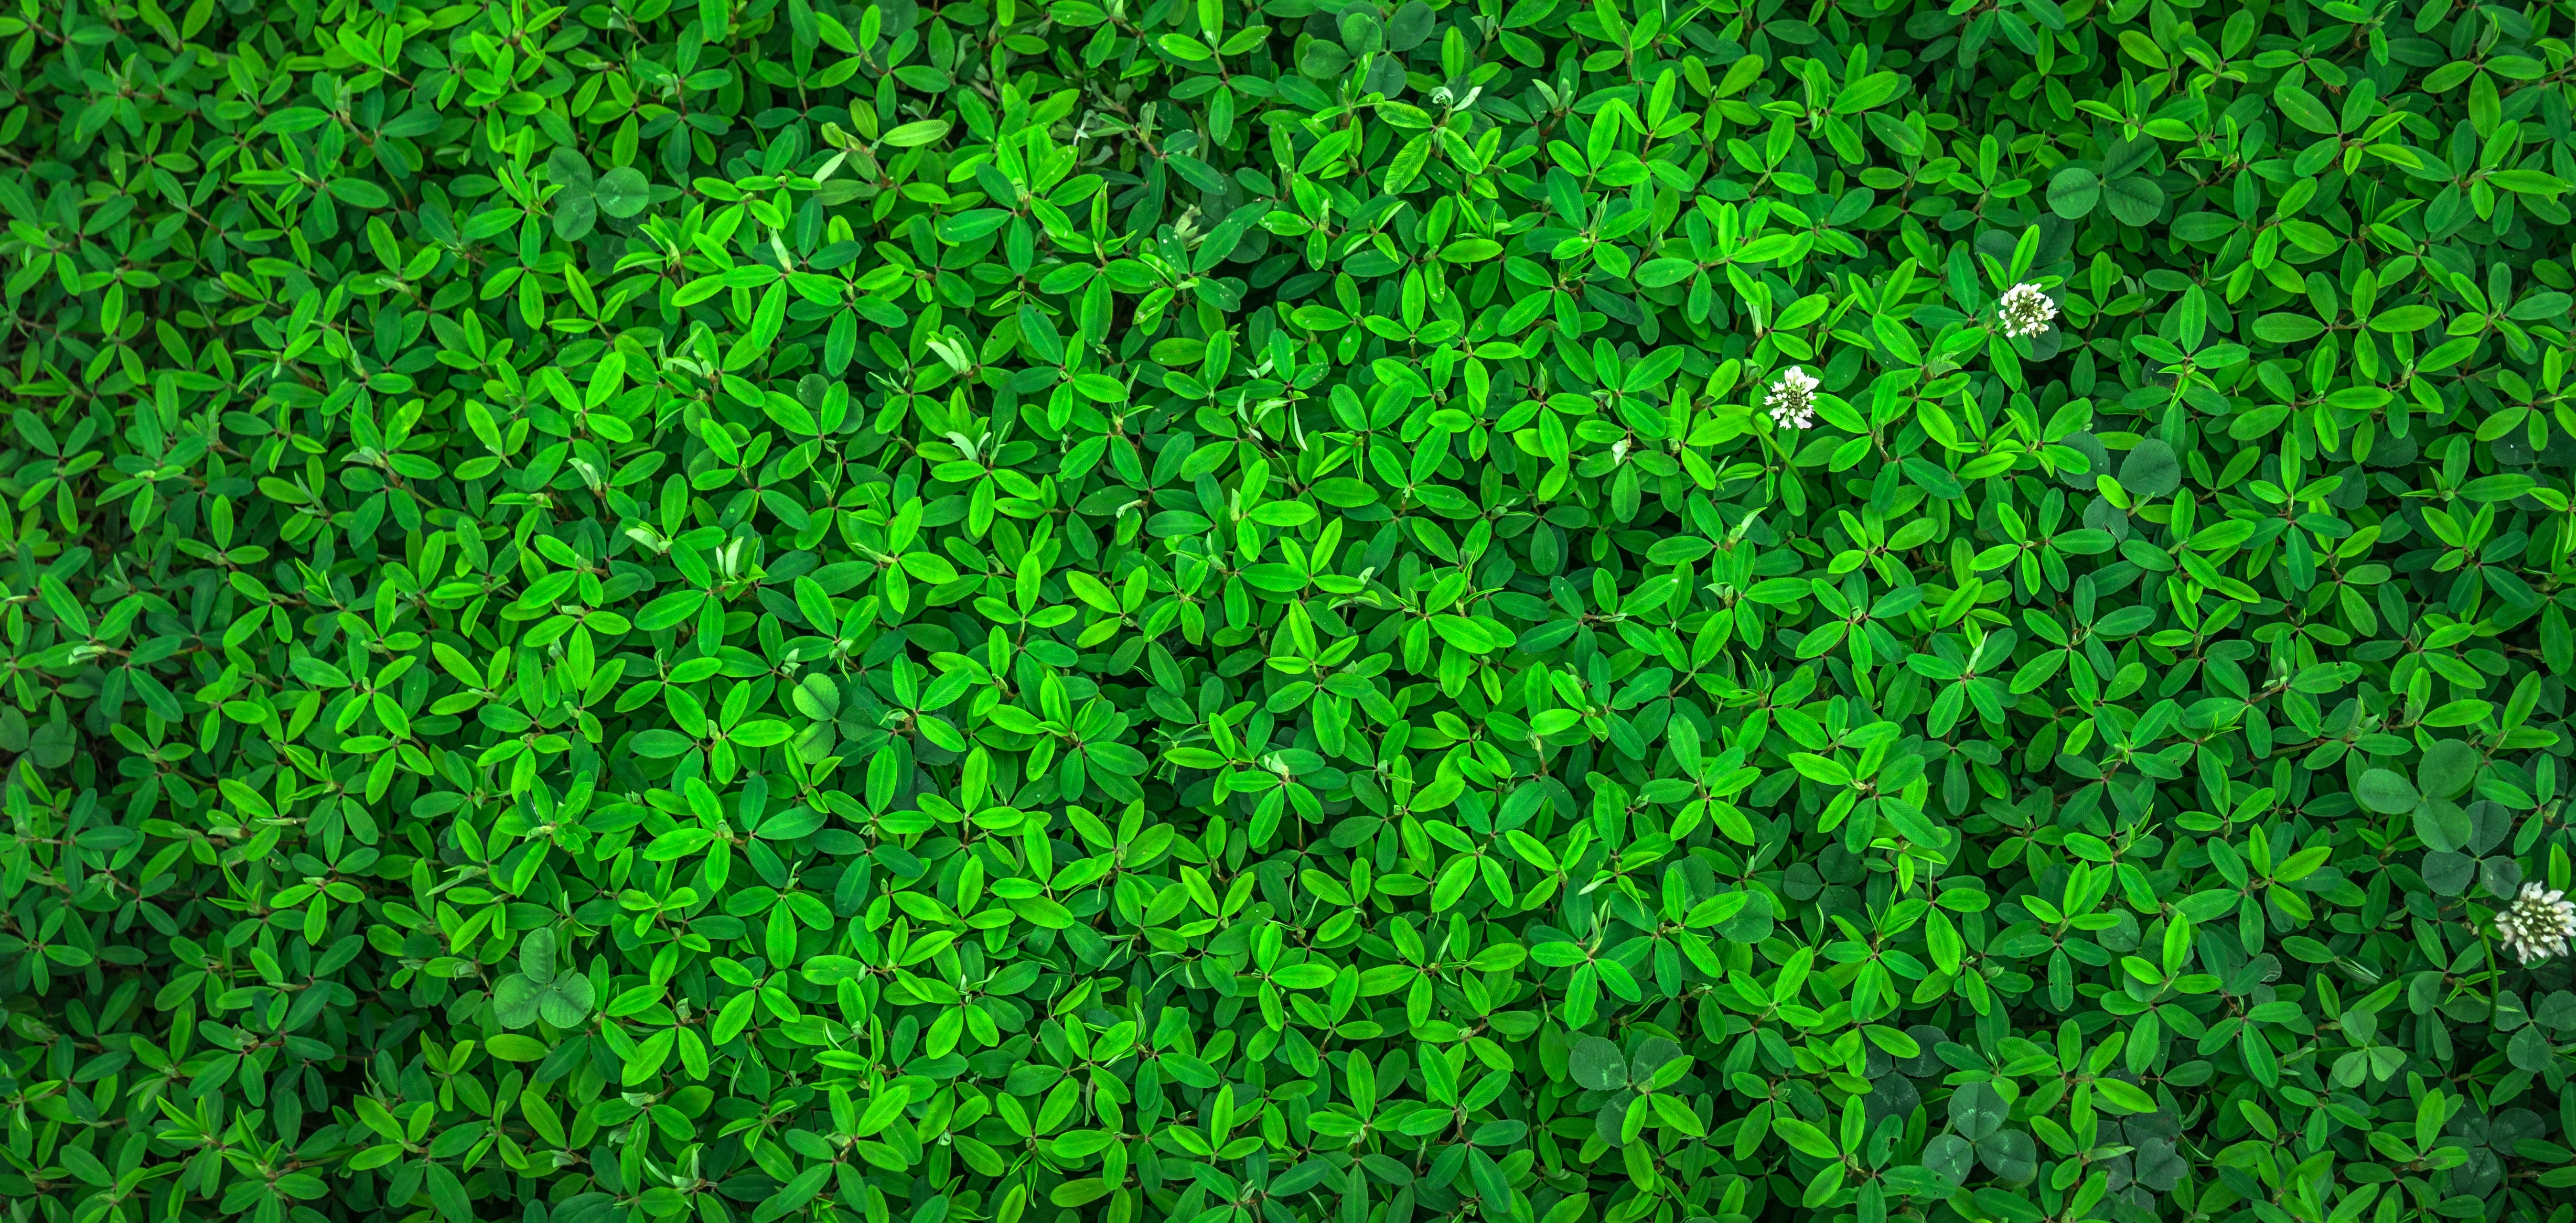 Green Wallpaper Photo, Download The BEST Free Green Wallpaper & HD Image